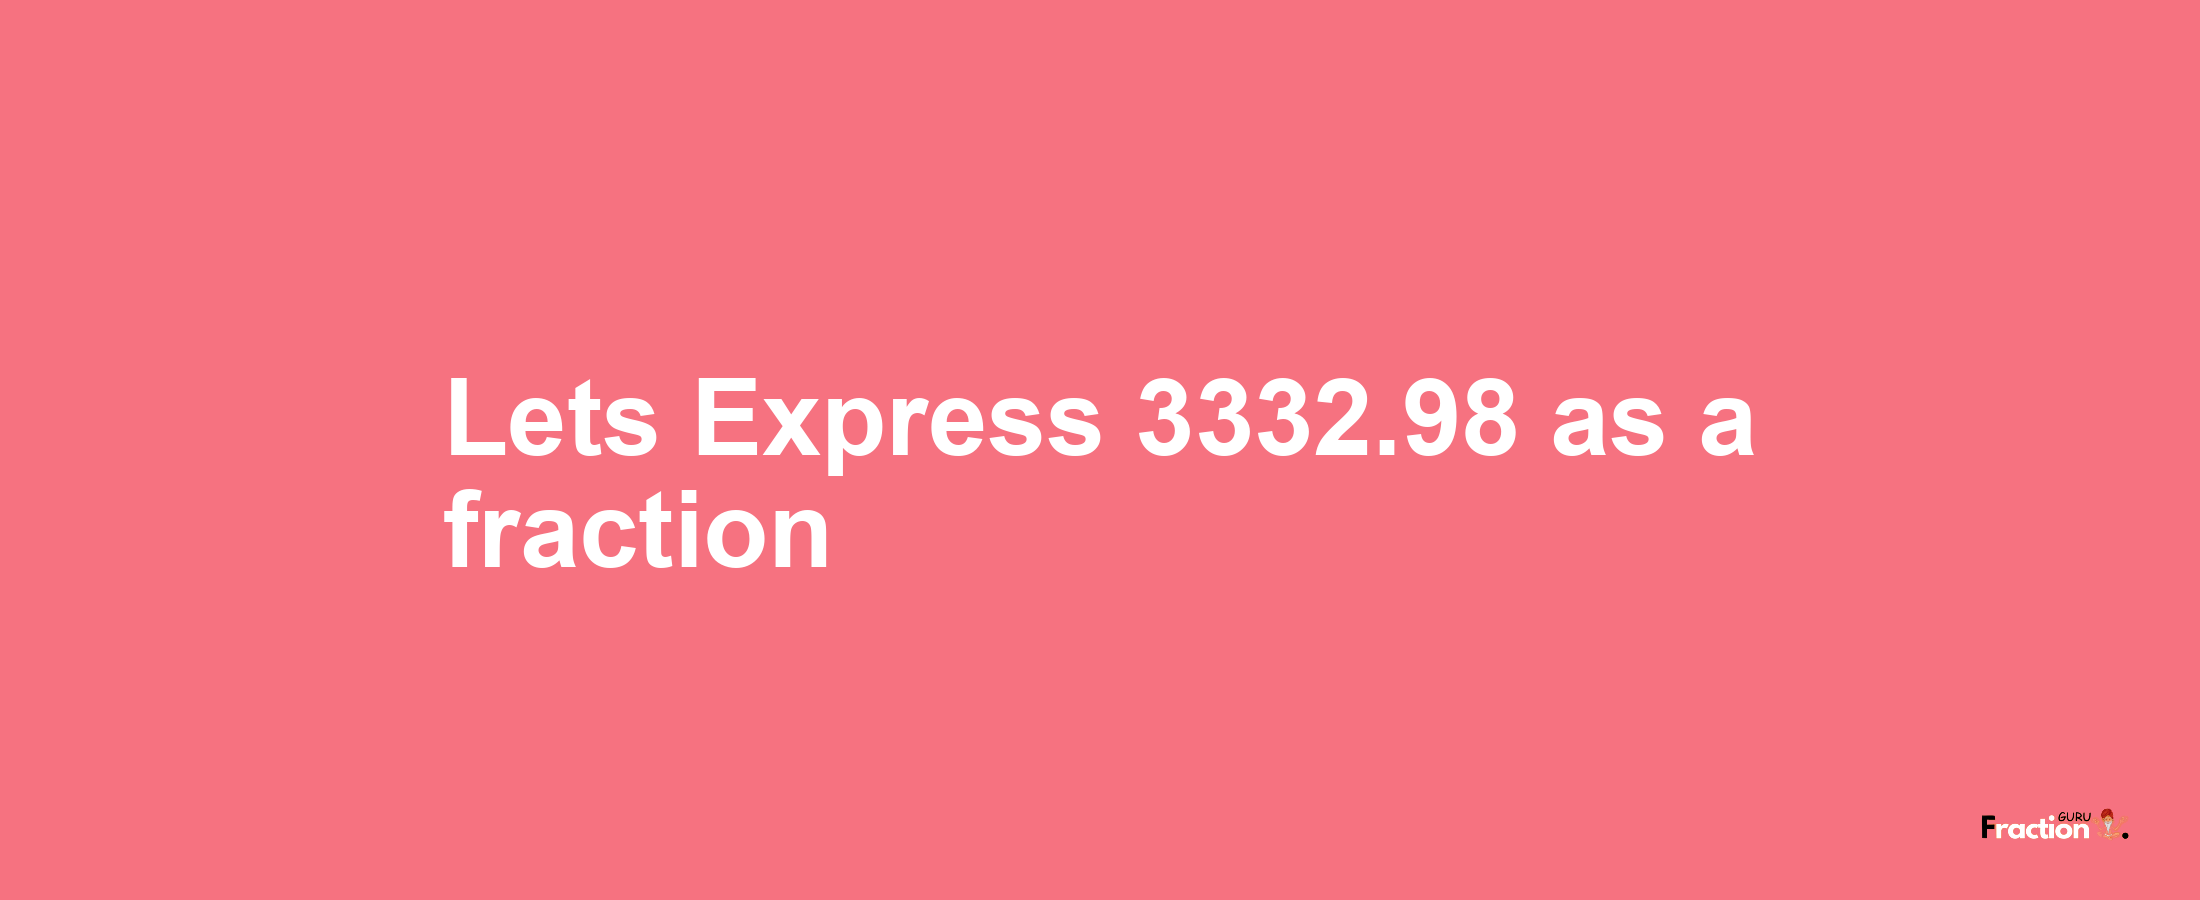 Lets Express 3332.98 as afraction